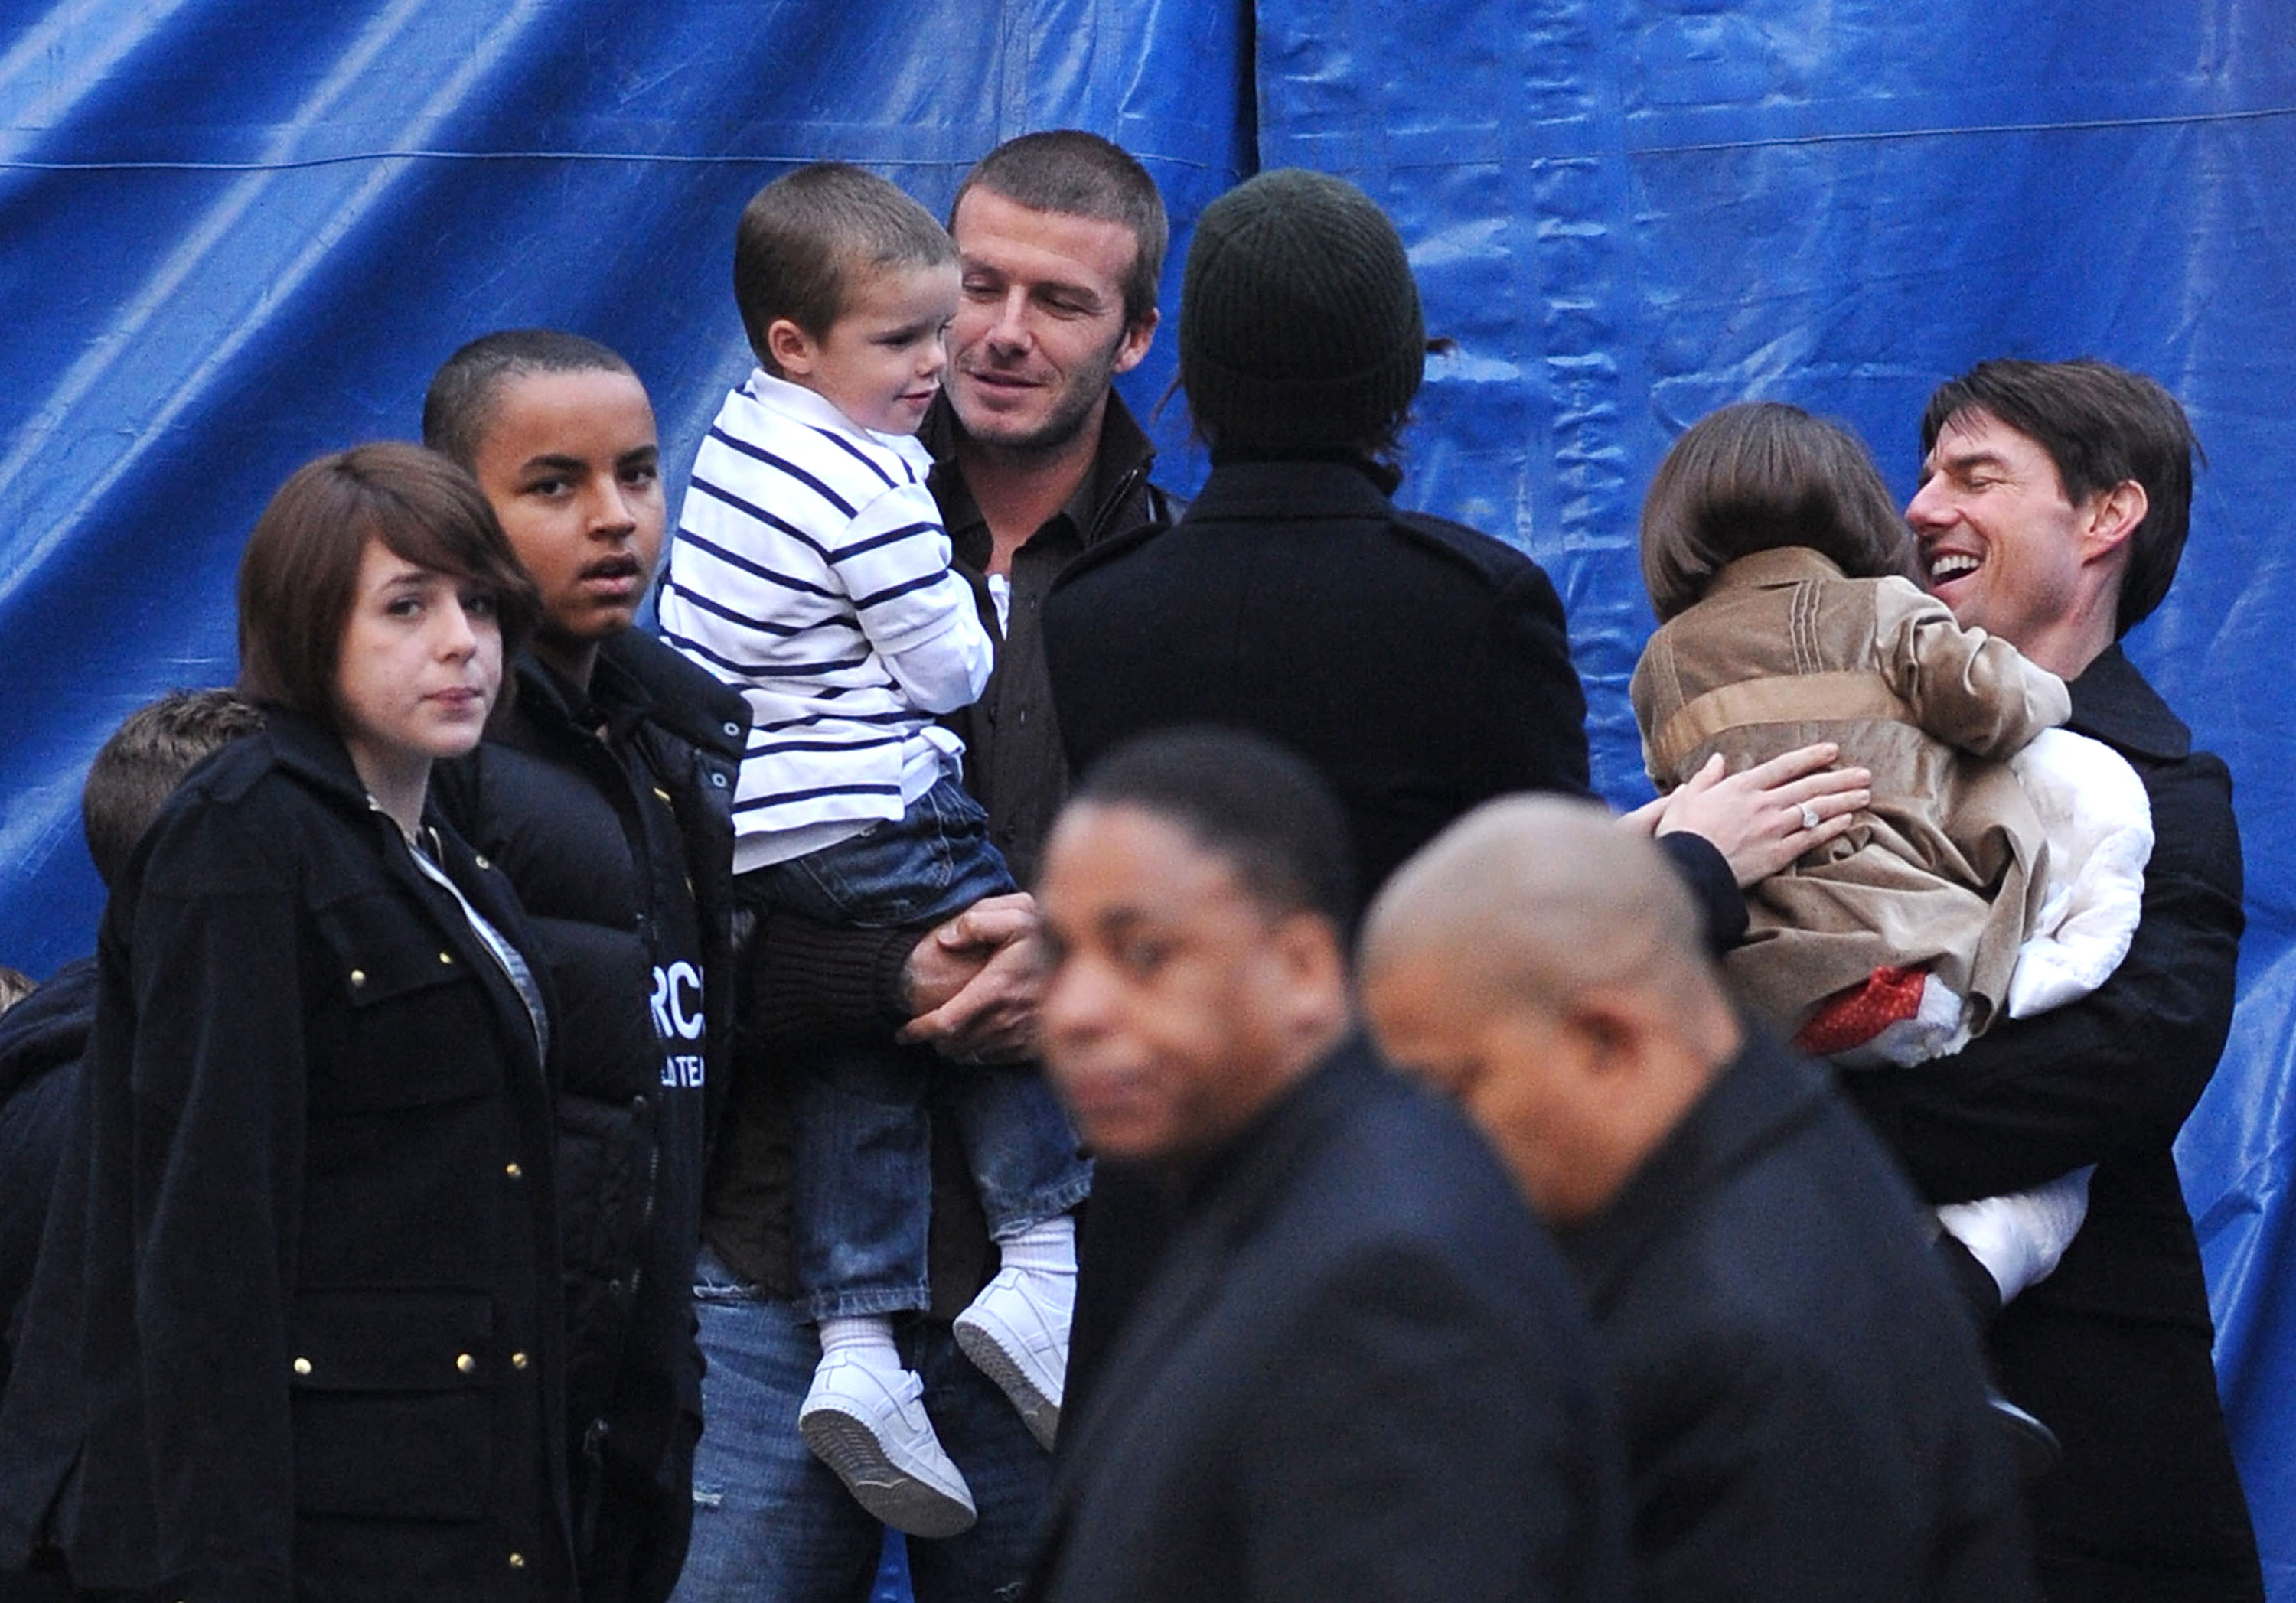 Isabella Cruise, Connor Cruise, Cruz Beckham, David Beckham, Katie Holmes, Tom Cruise and Suri Cruise leave the Big Apple Circus on November 27, 2008 in New York City. | Source: Getty Images